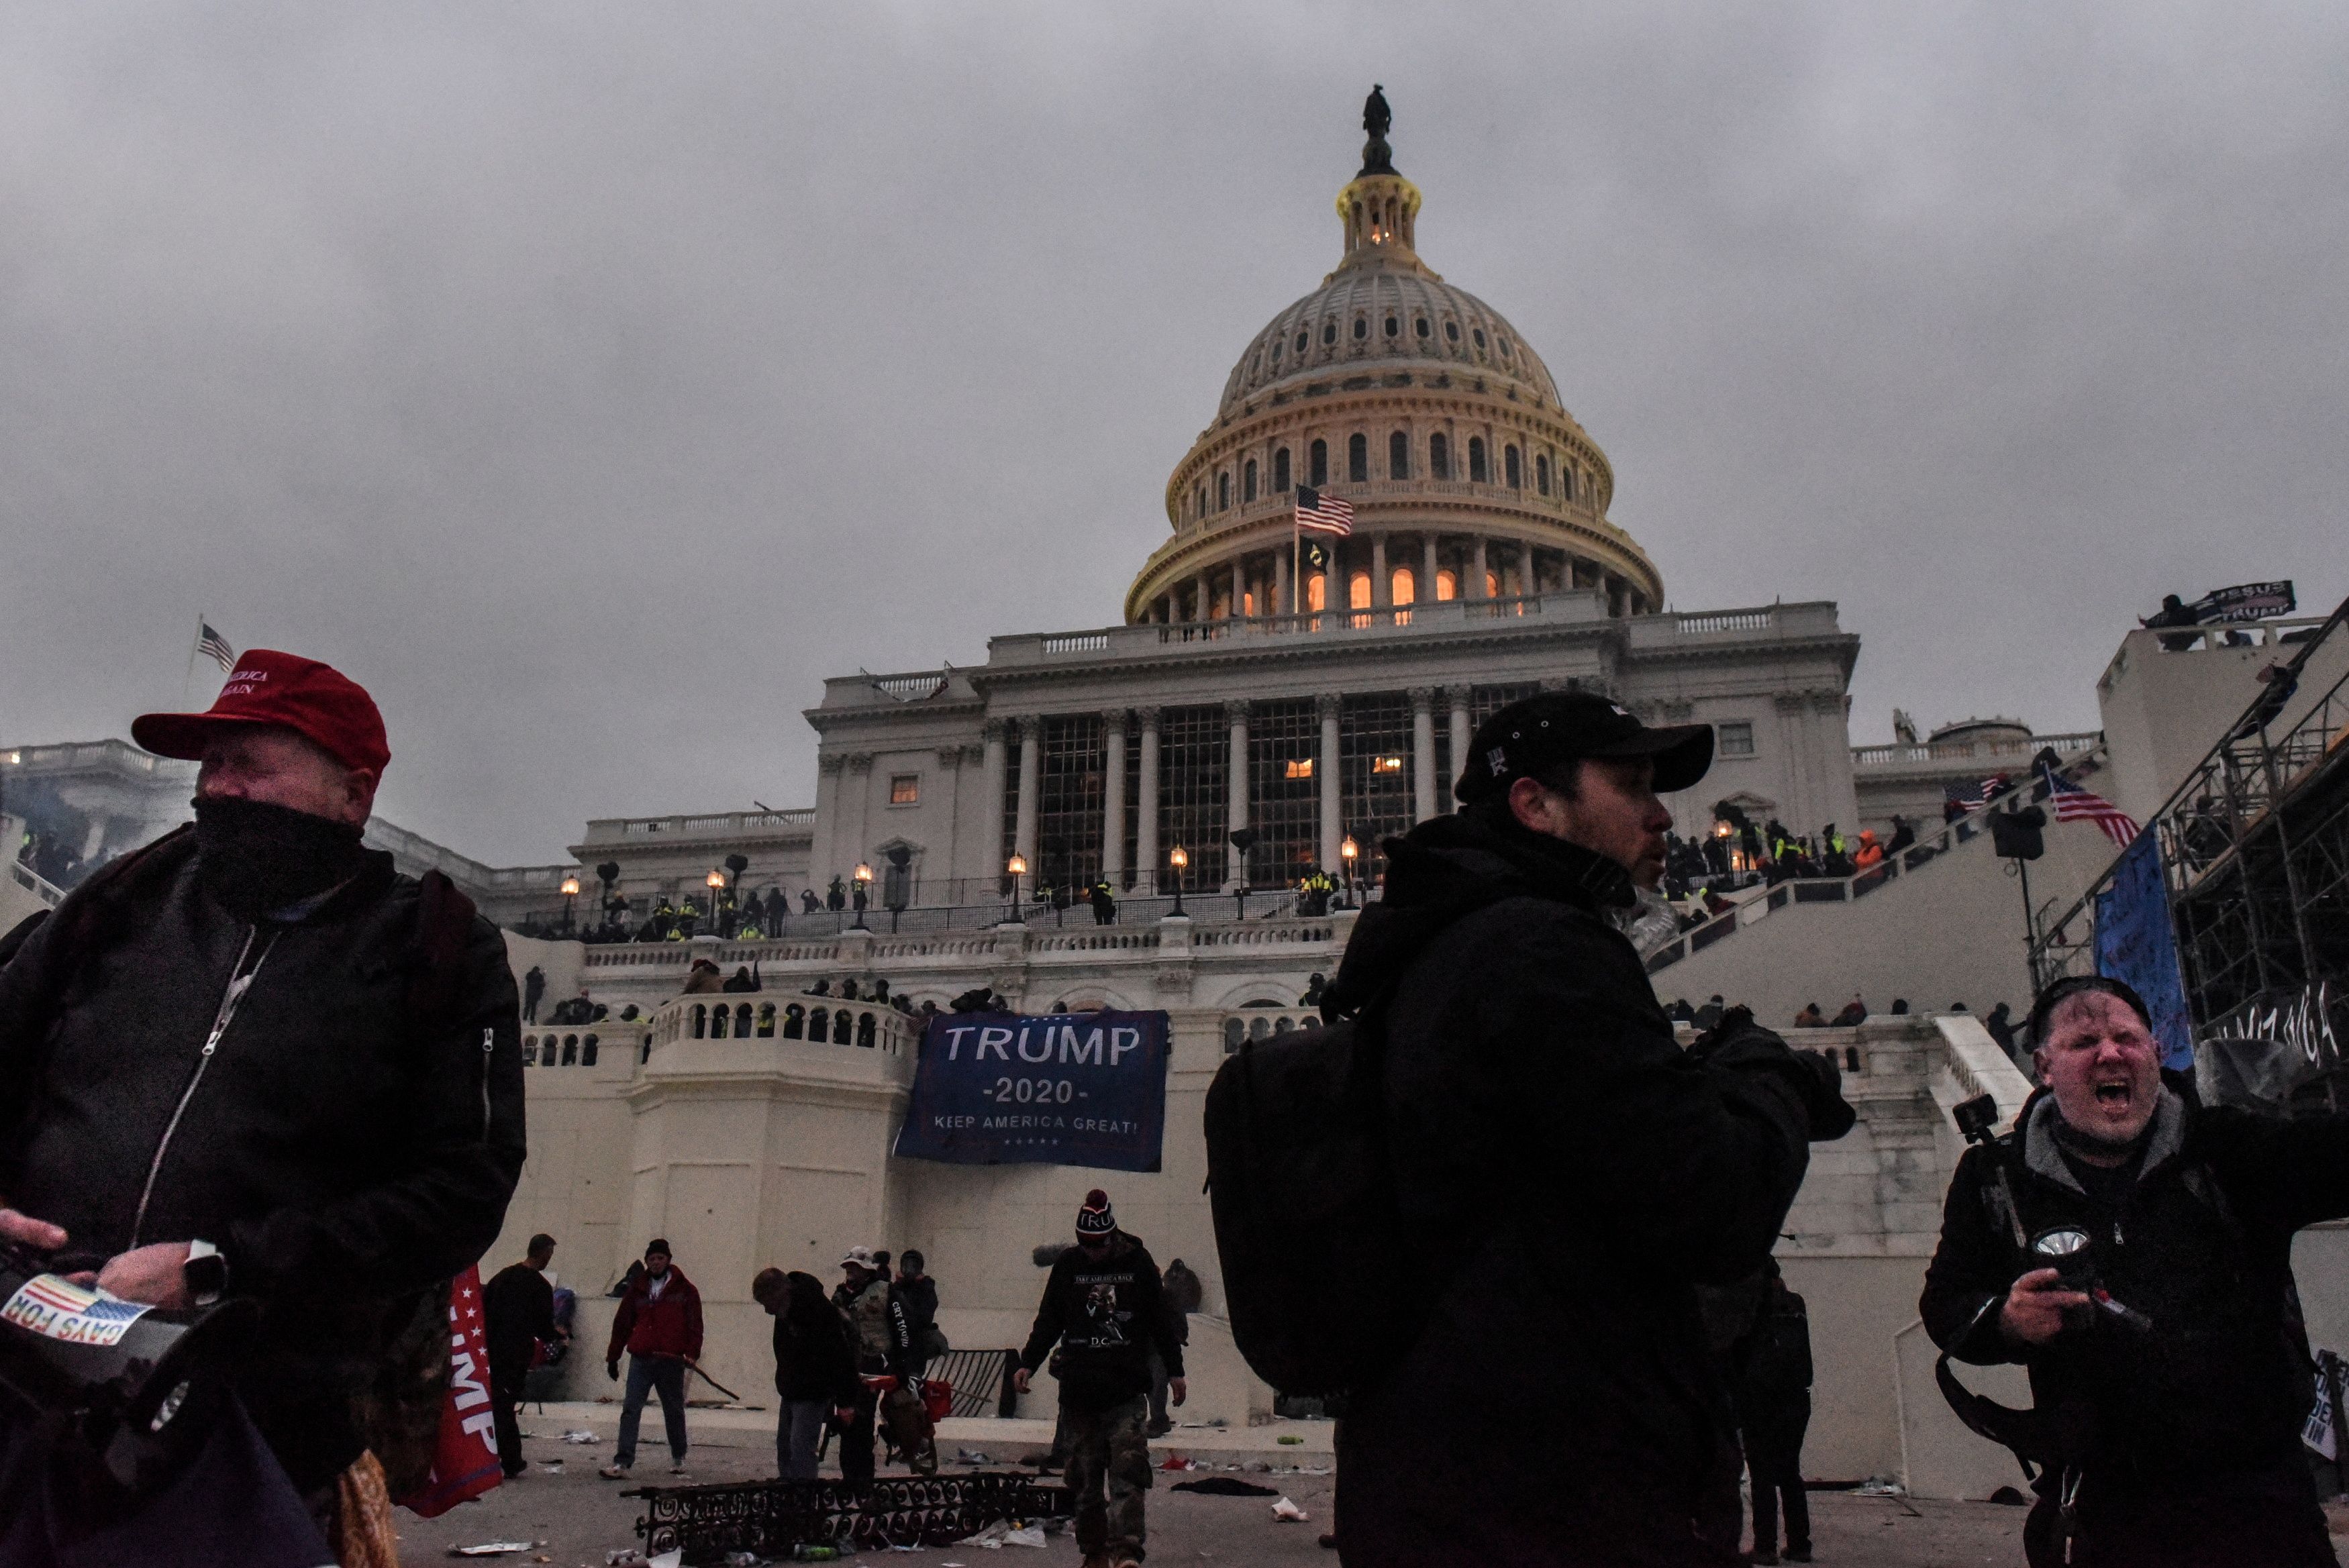 Supporters of U.S. President Donald Trump leave the Capitol building after being tear gassed during a "Stop the Steal" protest outside of the Capitol building in Washington D.C. U.S. January 6, 2021. Picture taken January 6, 2021. REUTERS/Stephanie Keith